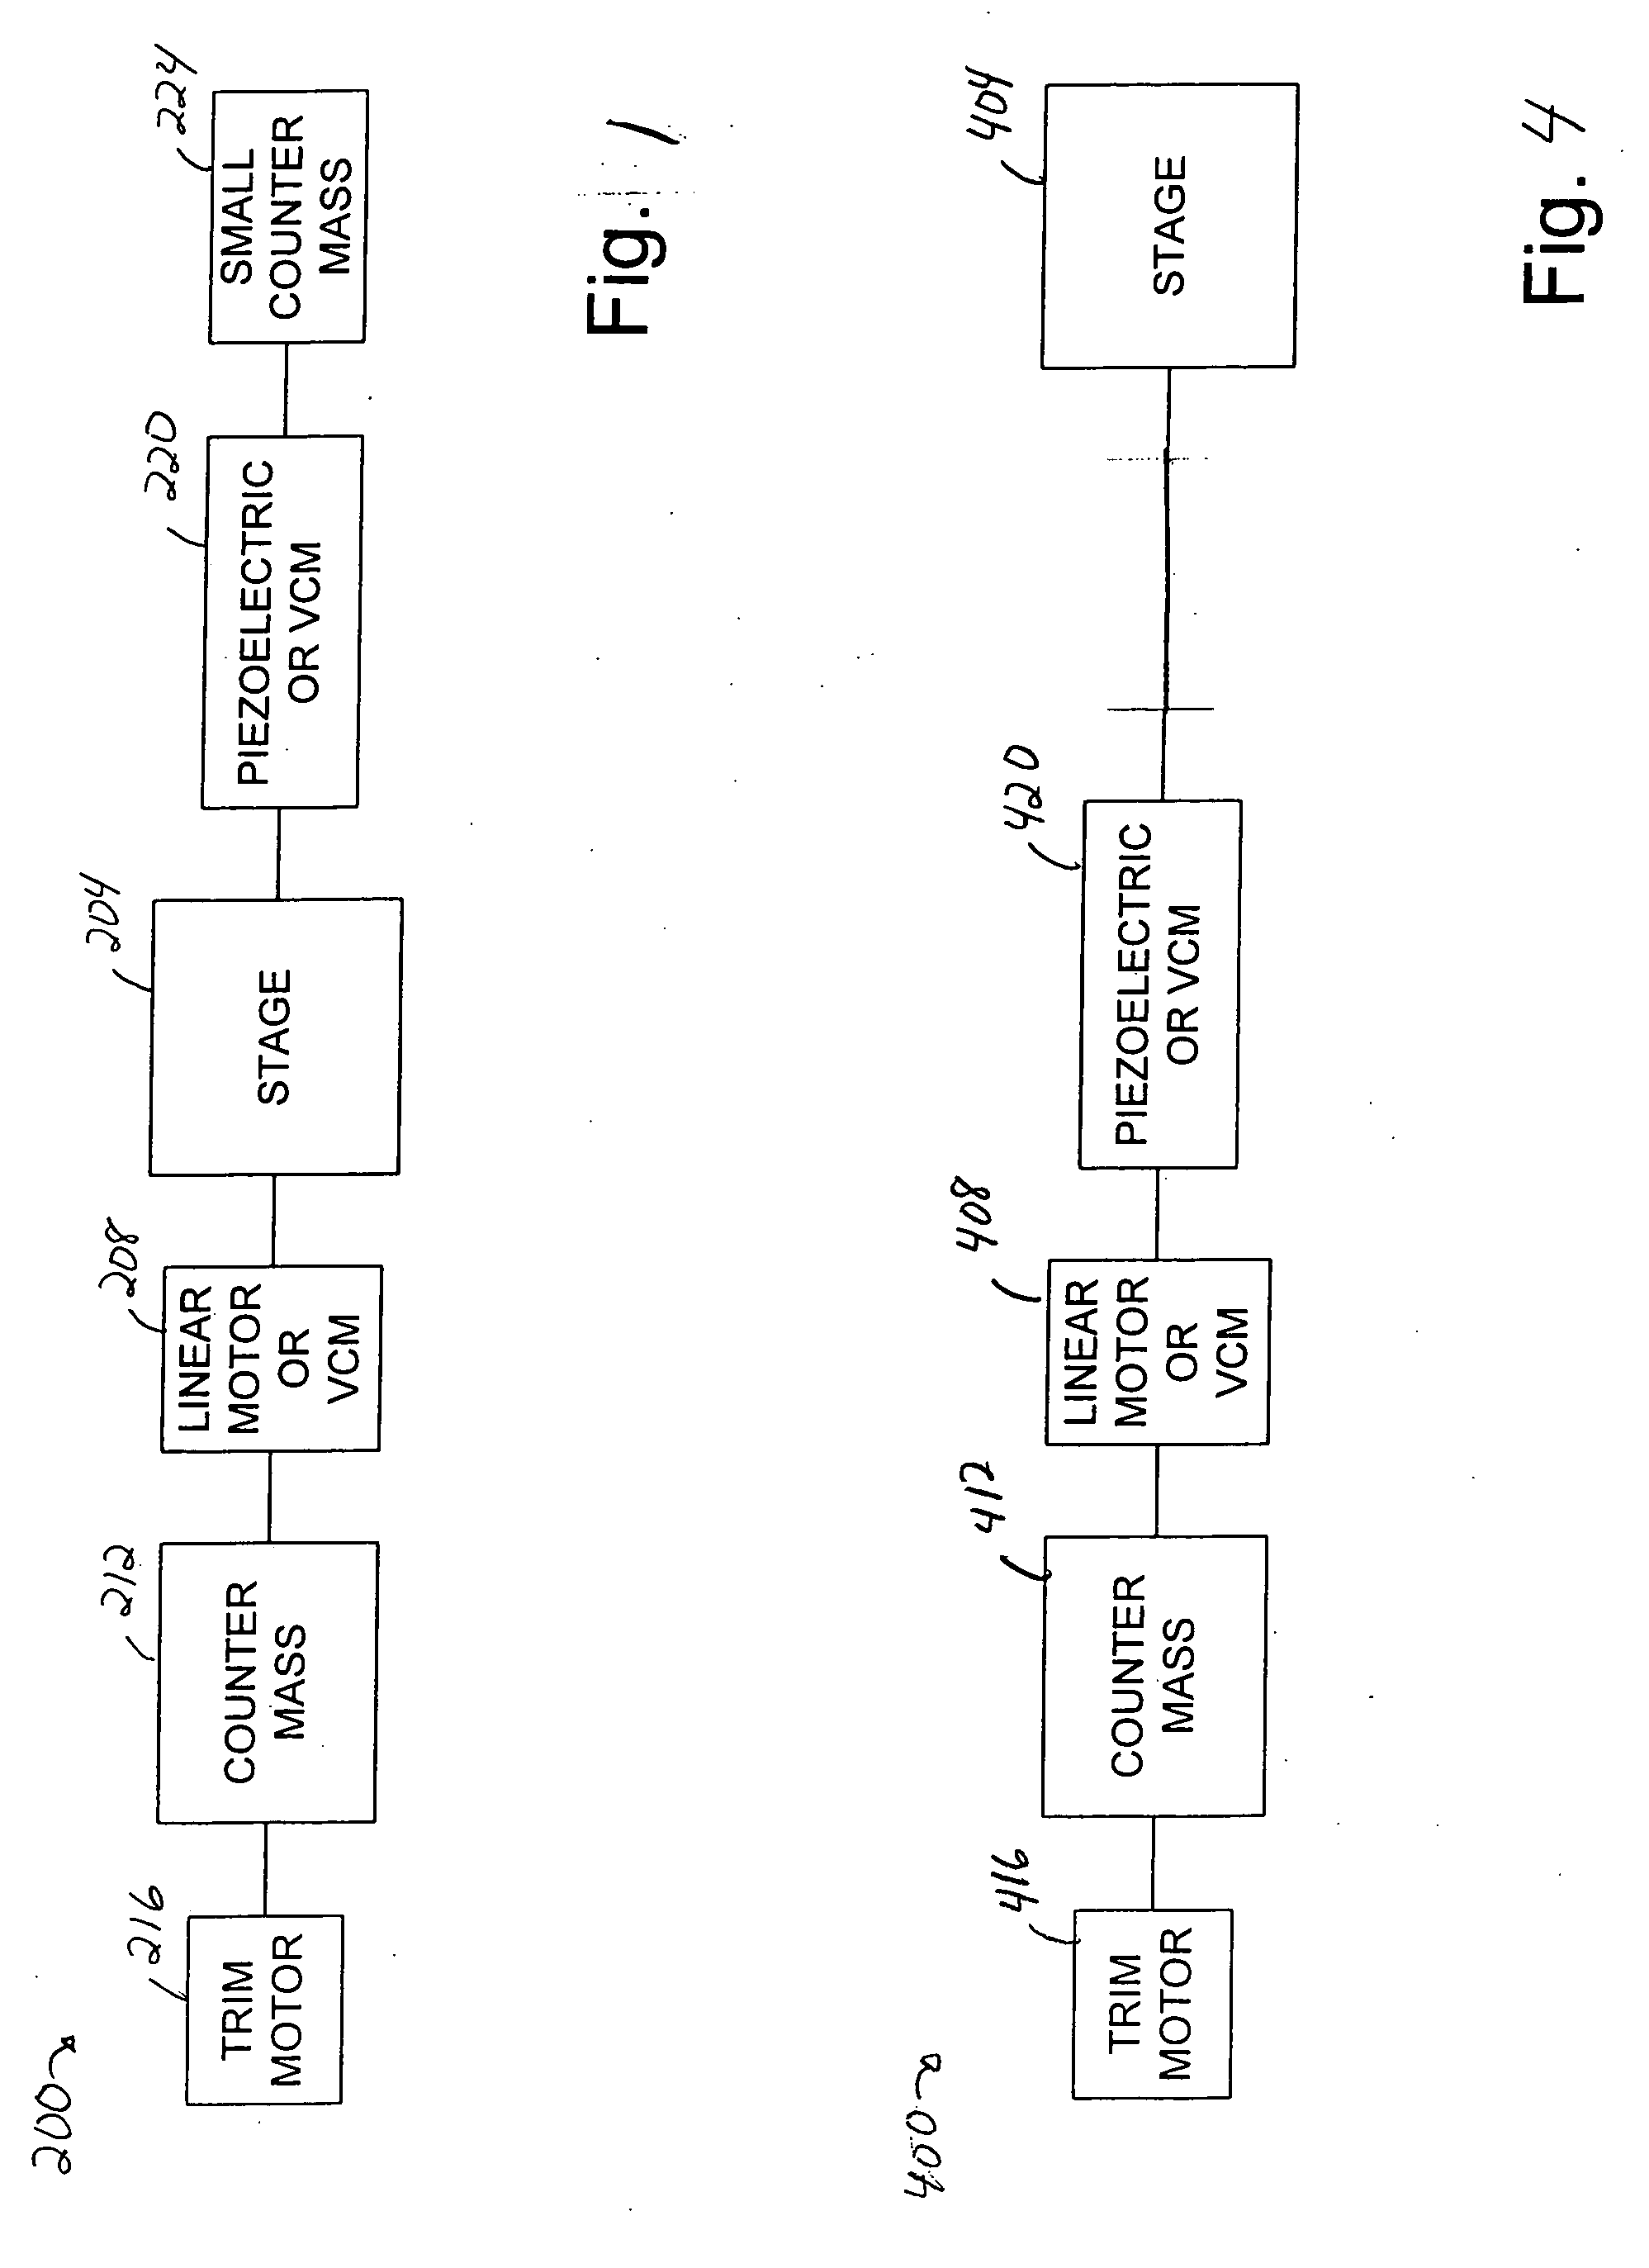 Moving mechanism with high bandwidth response and low force transmissibility